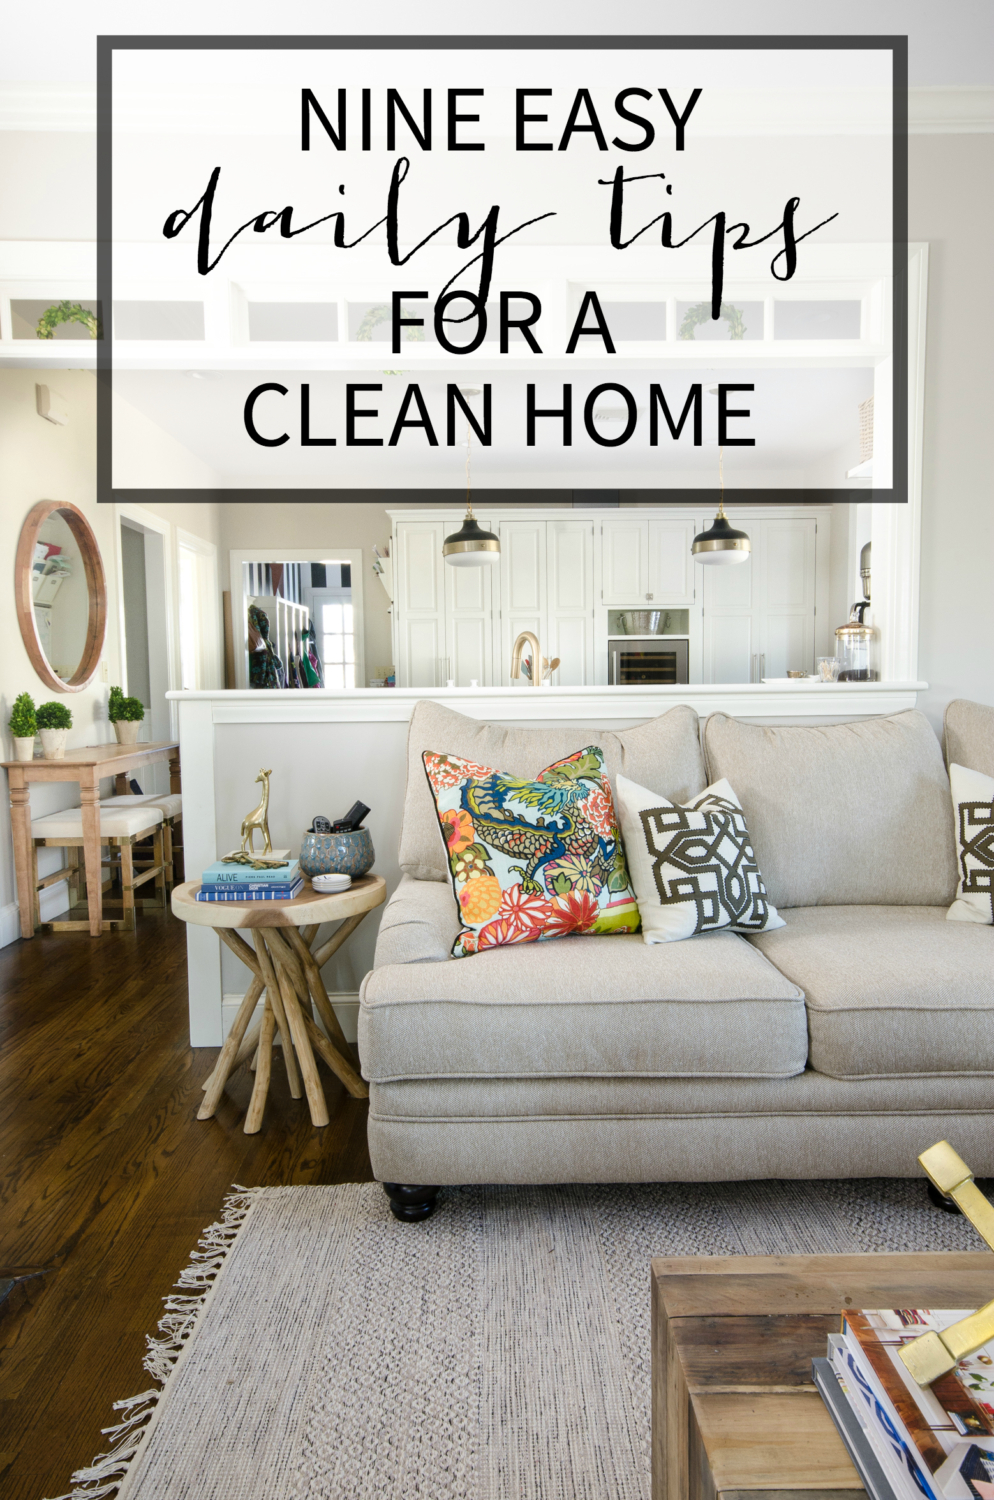 Nine easy tips for a clean home that you can use every day to easily keep your house looking and feeling tidy in mere minutes!